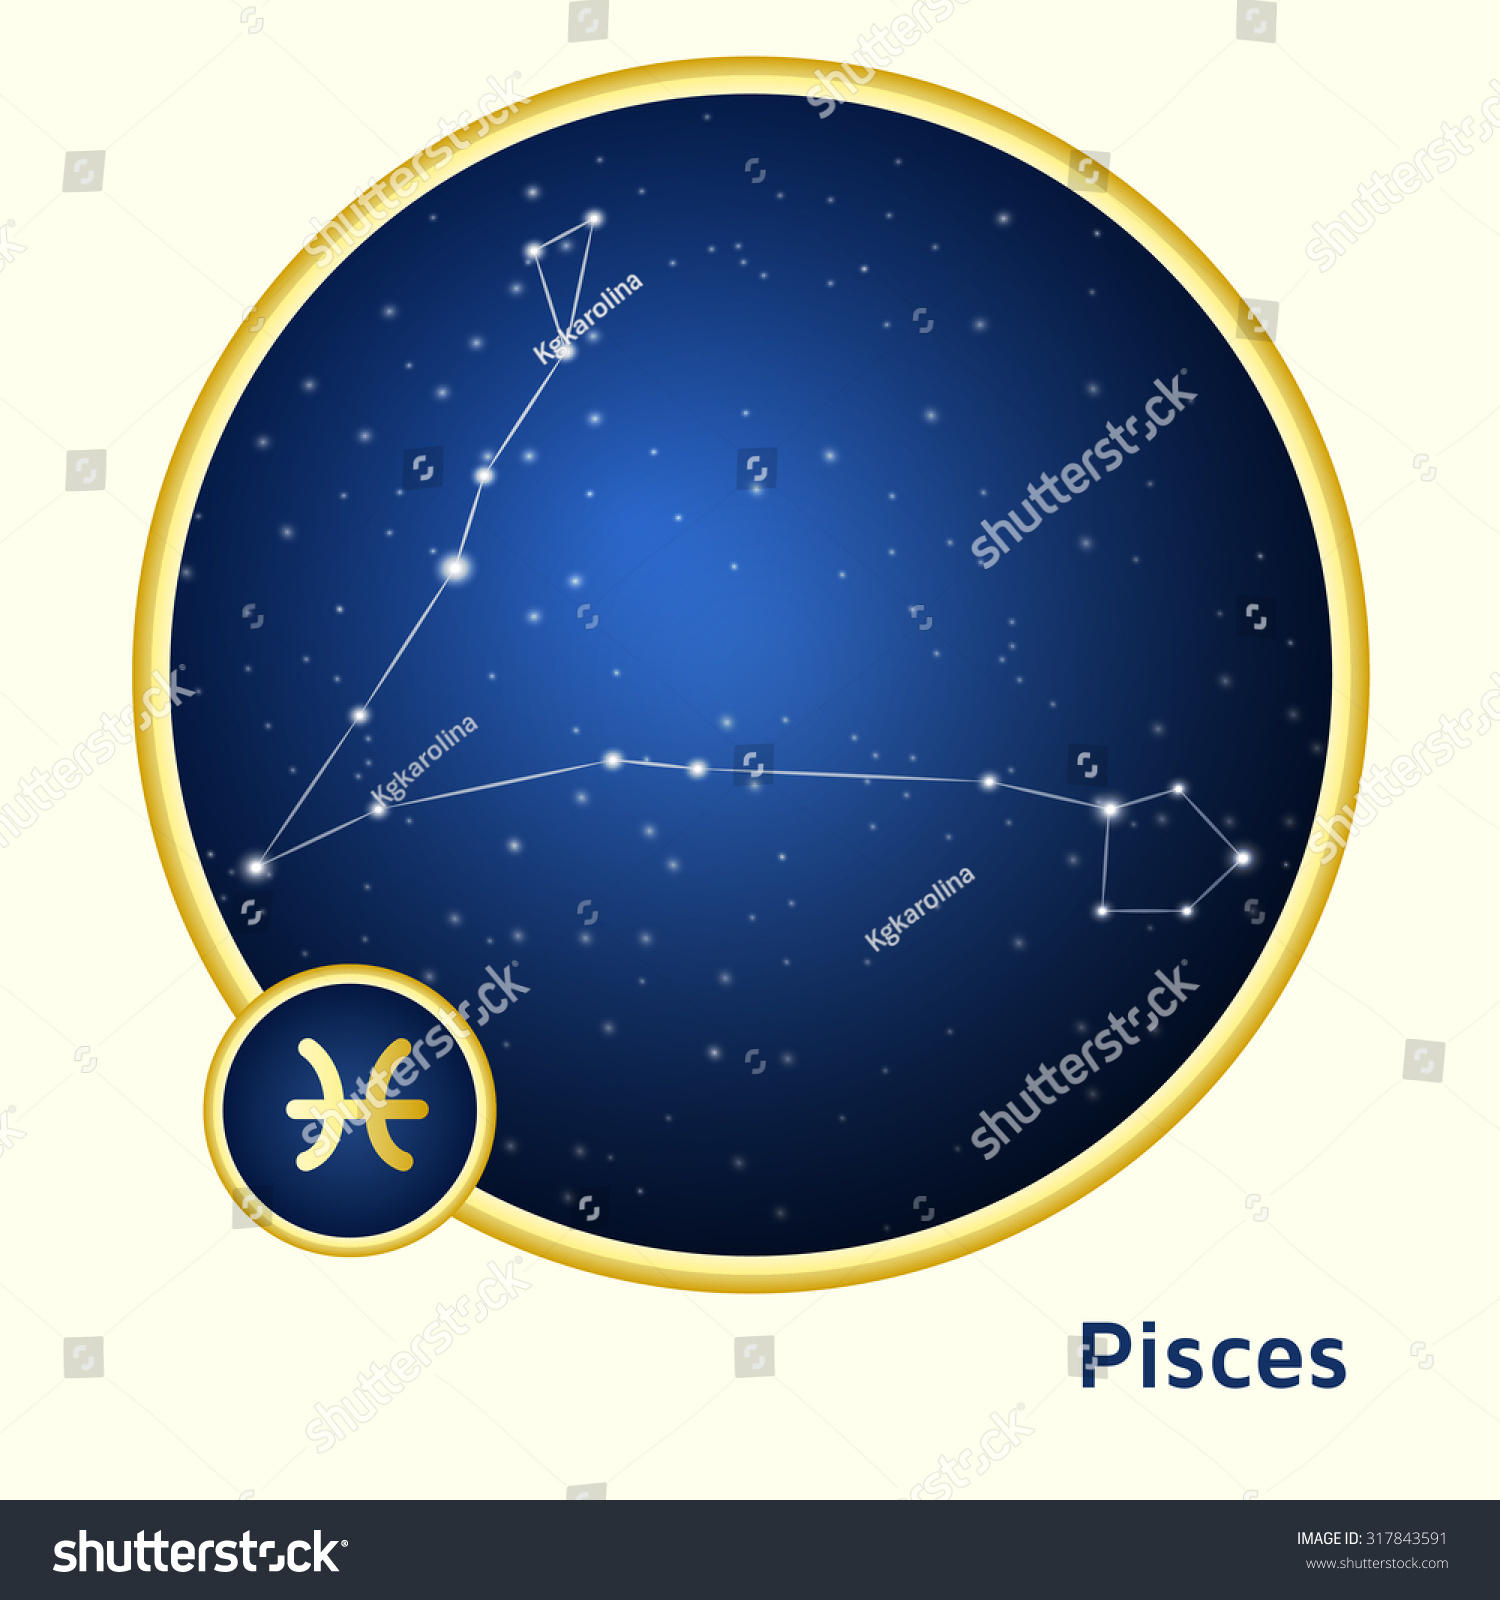 Pisces constellation zodiac sign in golden circle at starry night sky  #317843591